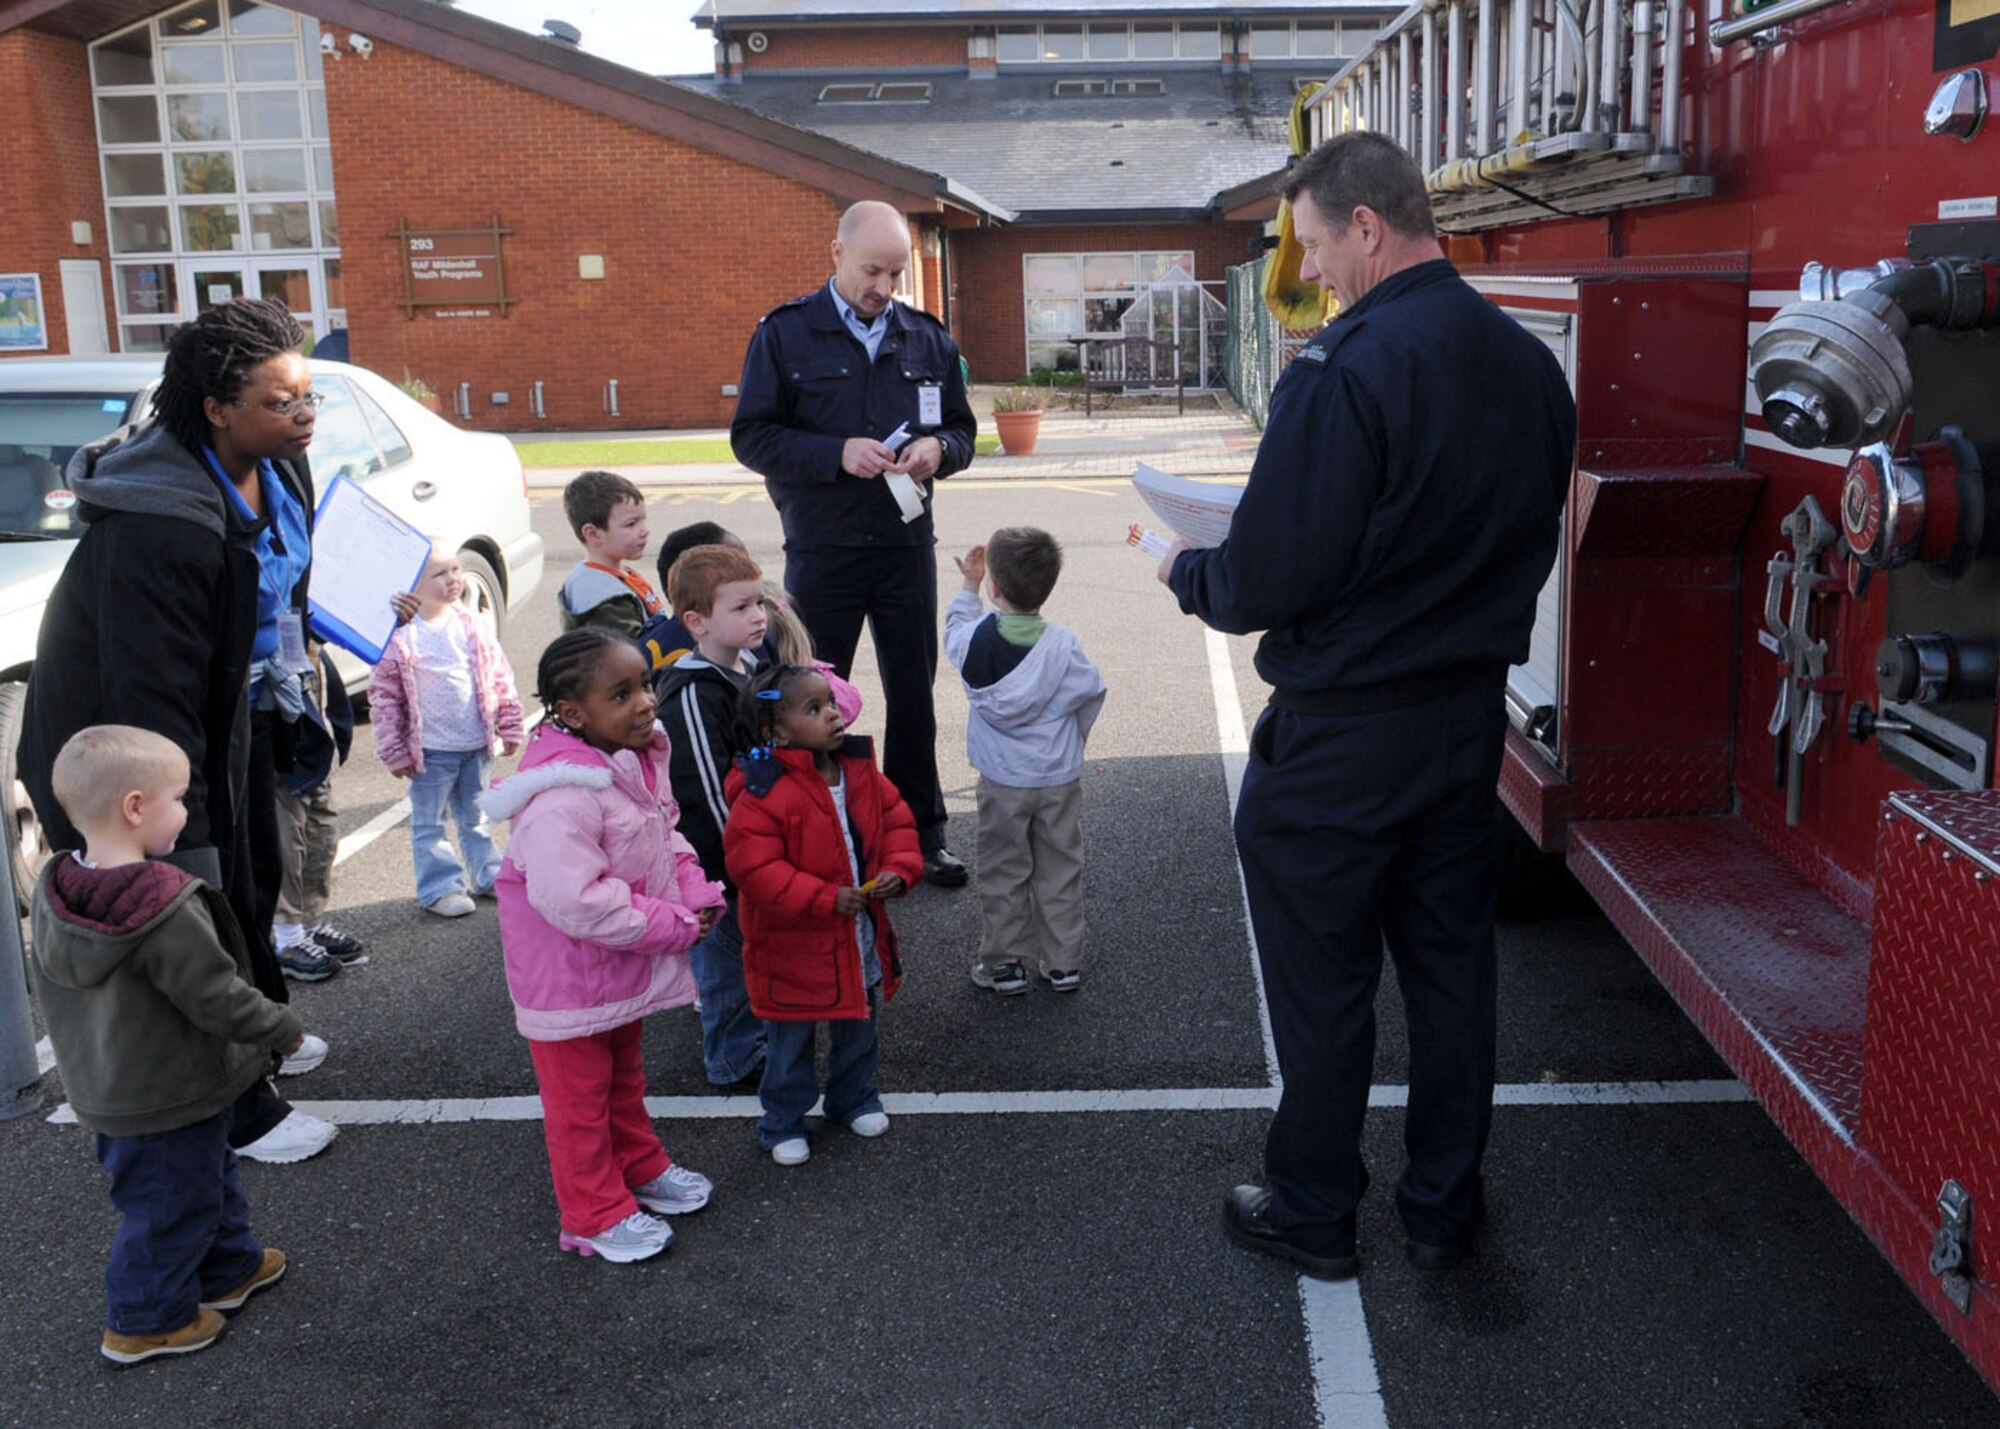 Military of Defence firefighters from the 100th Civil Engineer Squadron, Steve Tipler (center) and Barry Clark (right), show children from the Child Development Center around the fire truck Oct. 6, 2008, at RAF Mildenhall, England. The visit to the CDC was in support of “Fire Prevention Week” that takes place from Oct. 5 through 11. (U.S. Air Force photo by Staff Sgt. Jerry Fleshman)